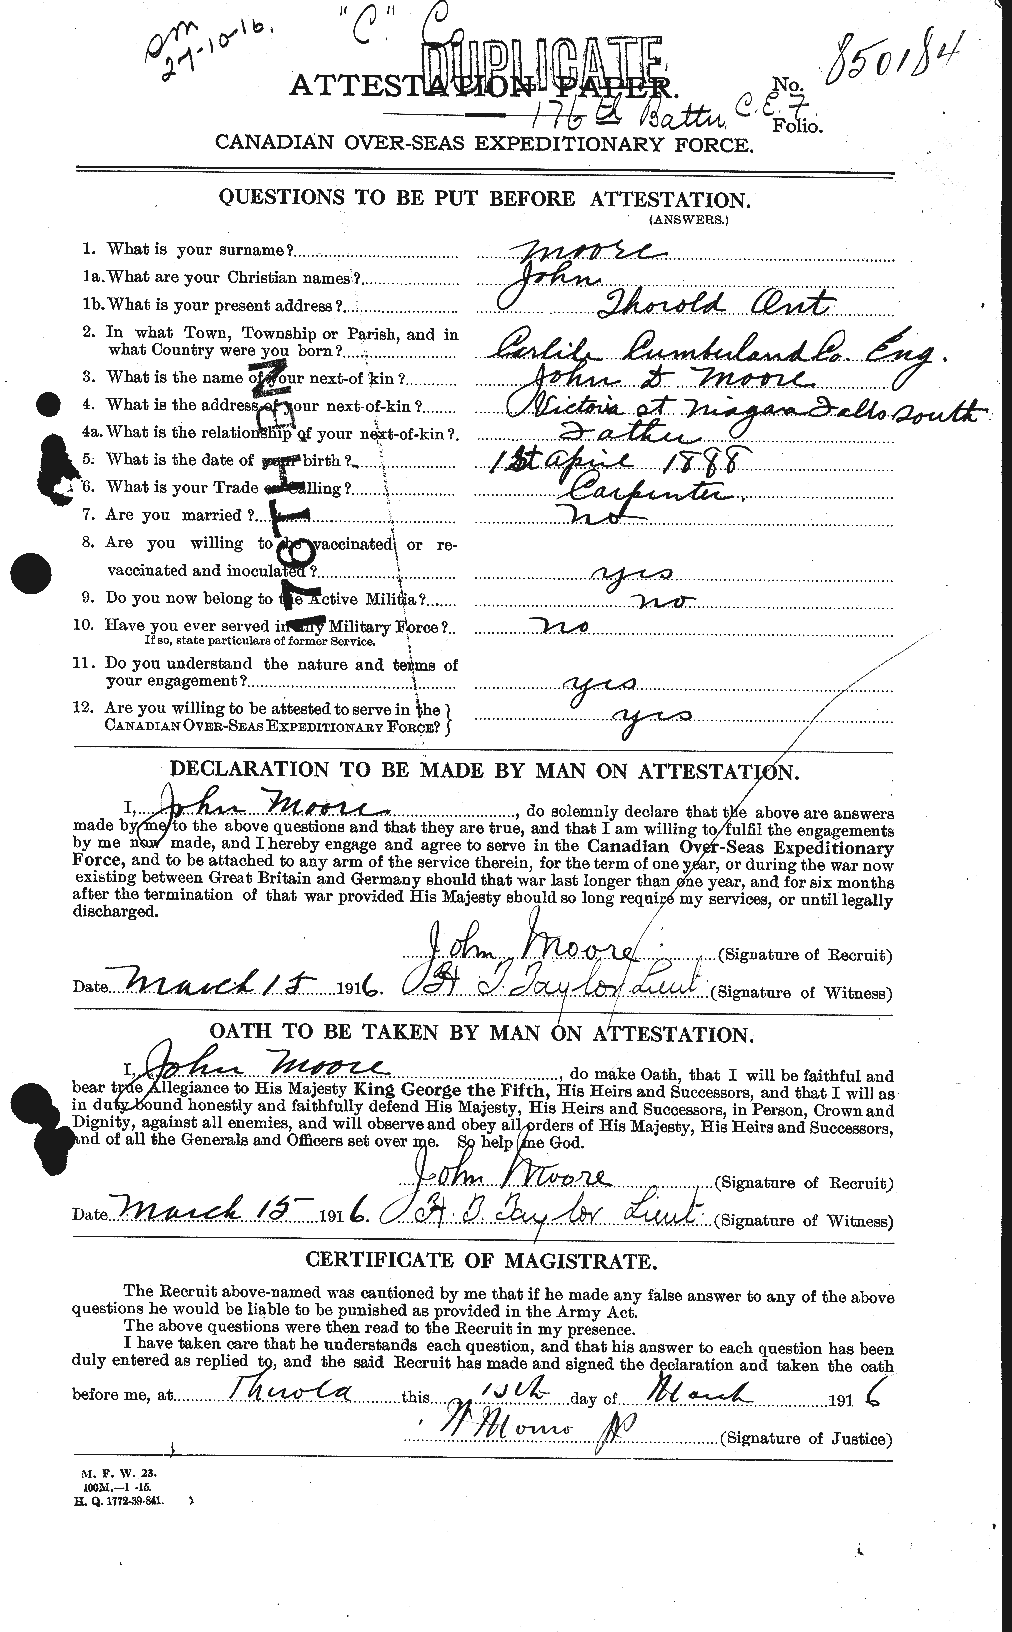 Personnel Records of the First World War - CEF 503228a